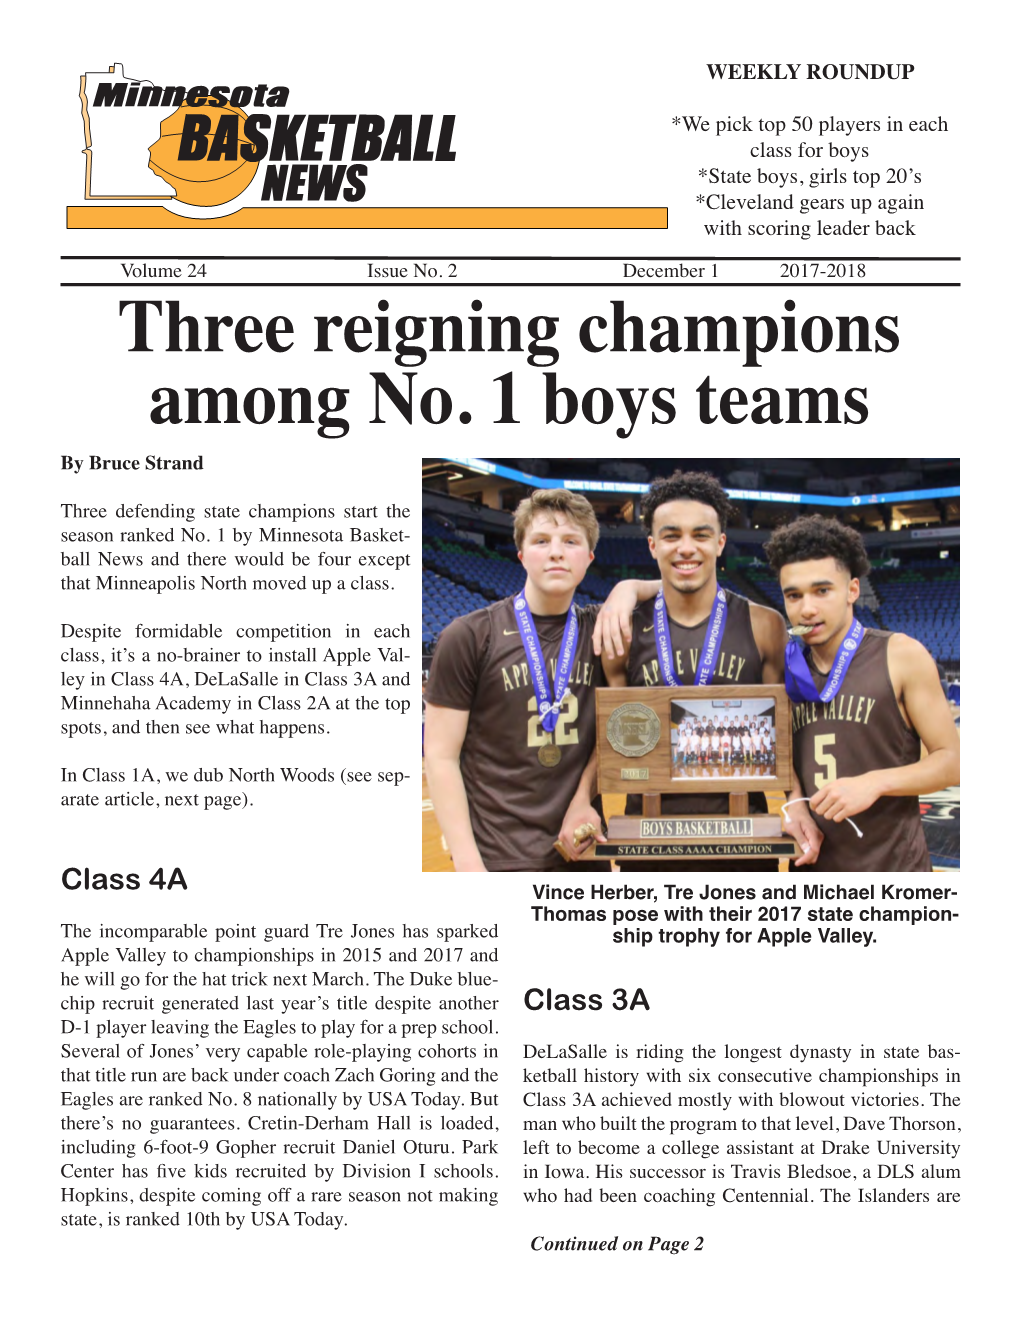 Three Reigning Champions Among No. 1 Boys Teams by Bruce Strand